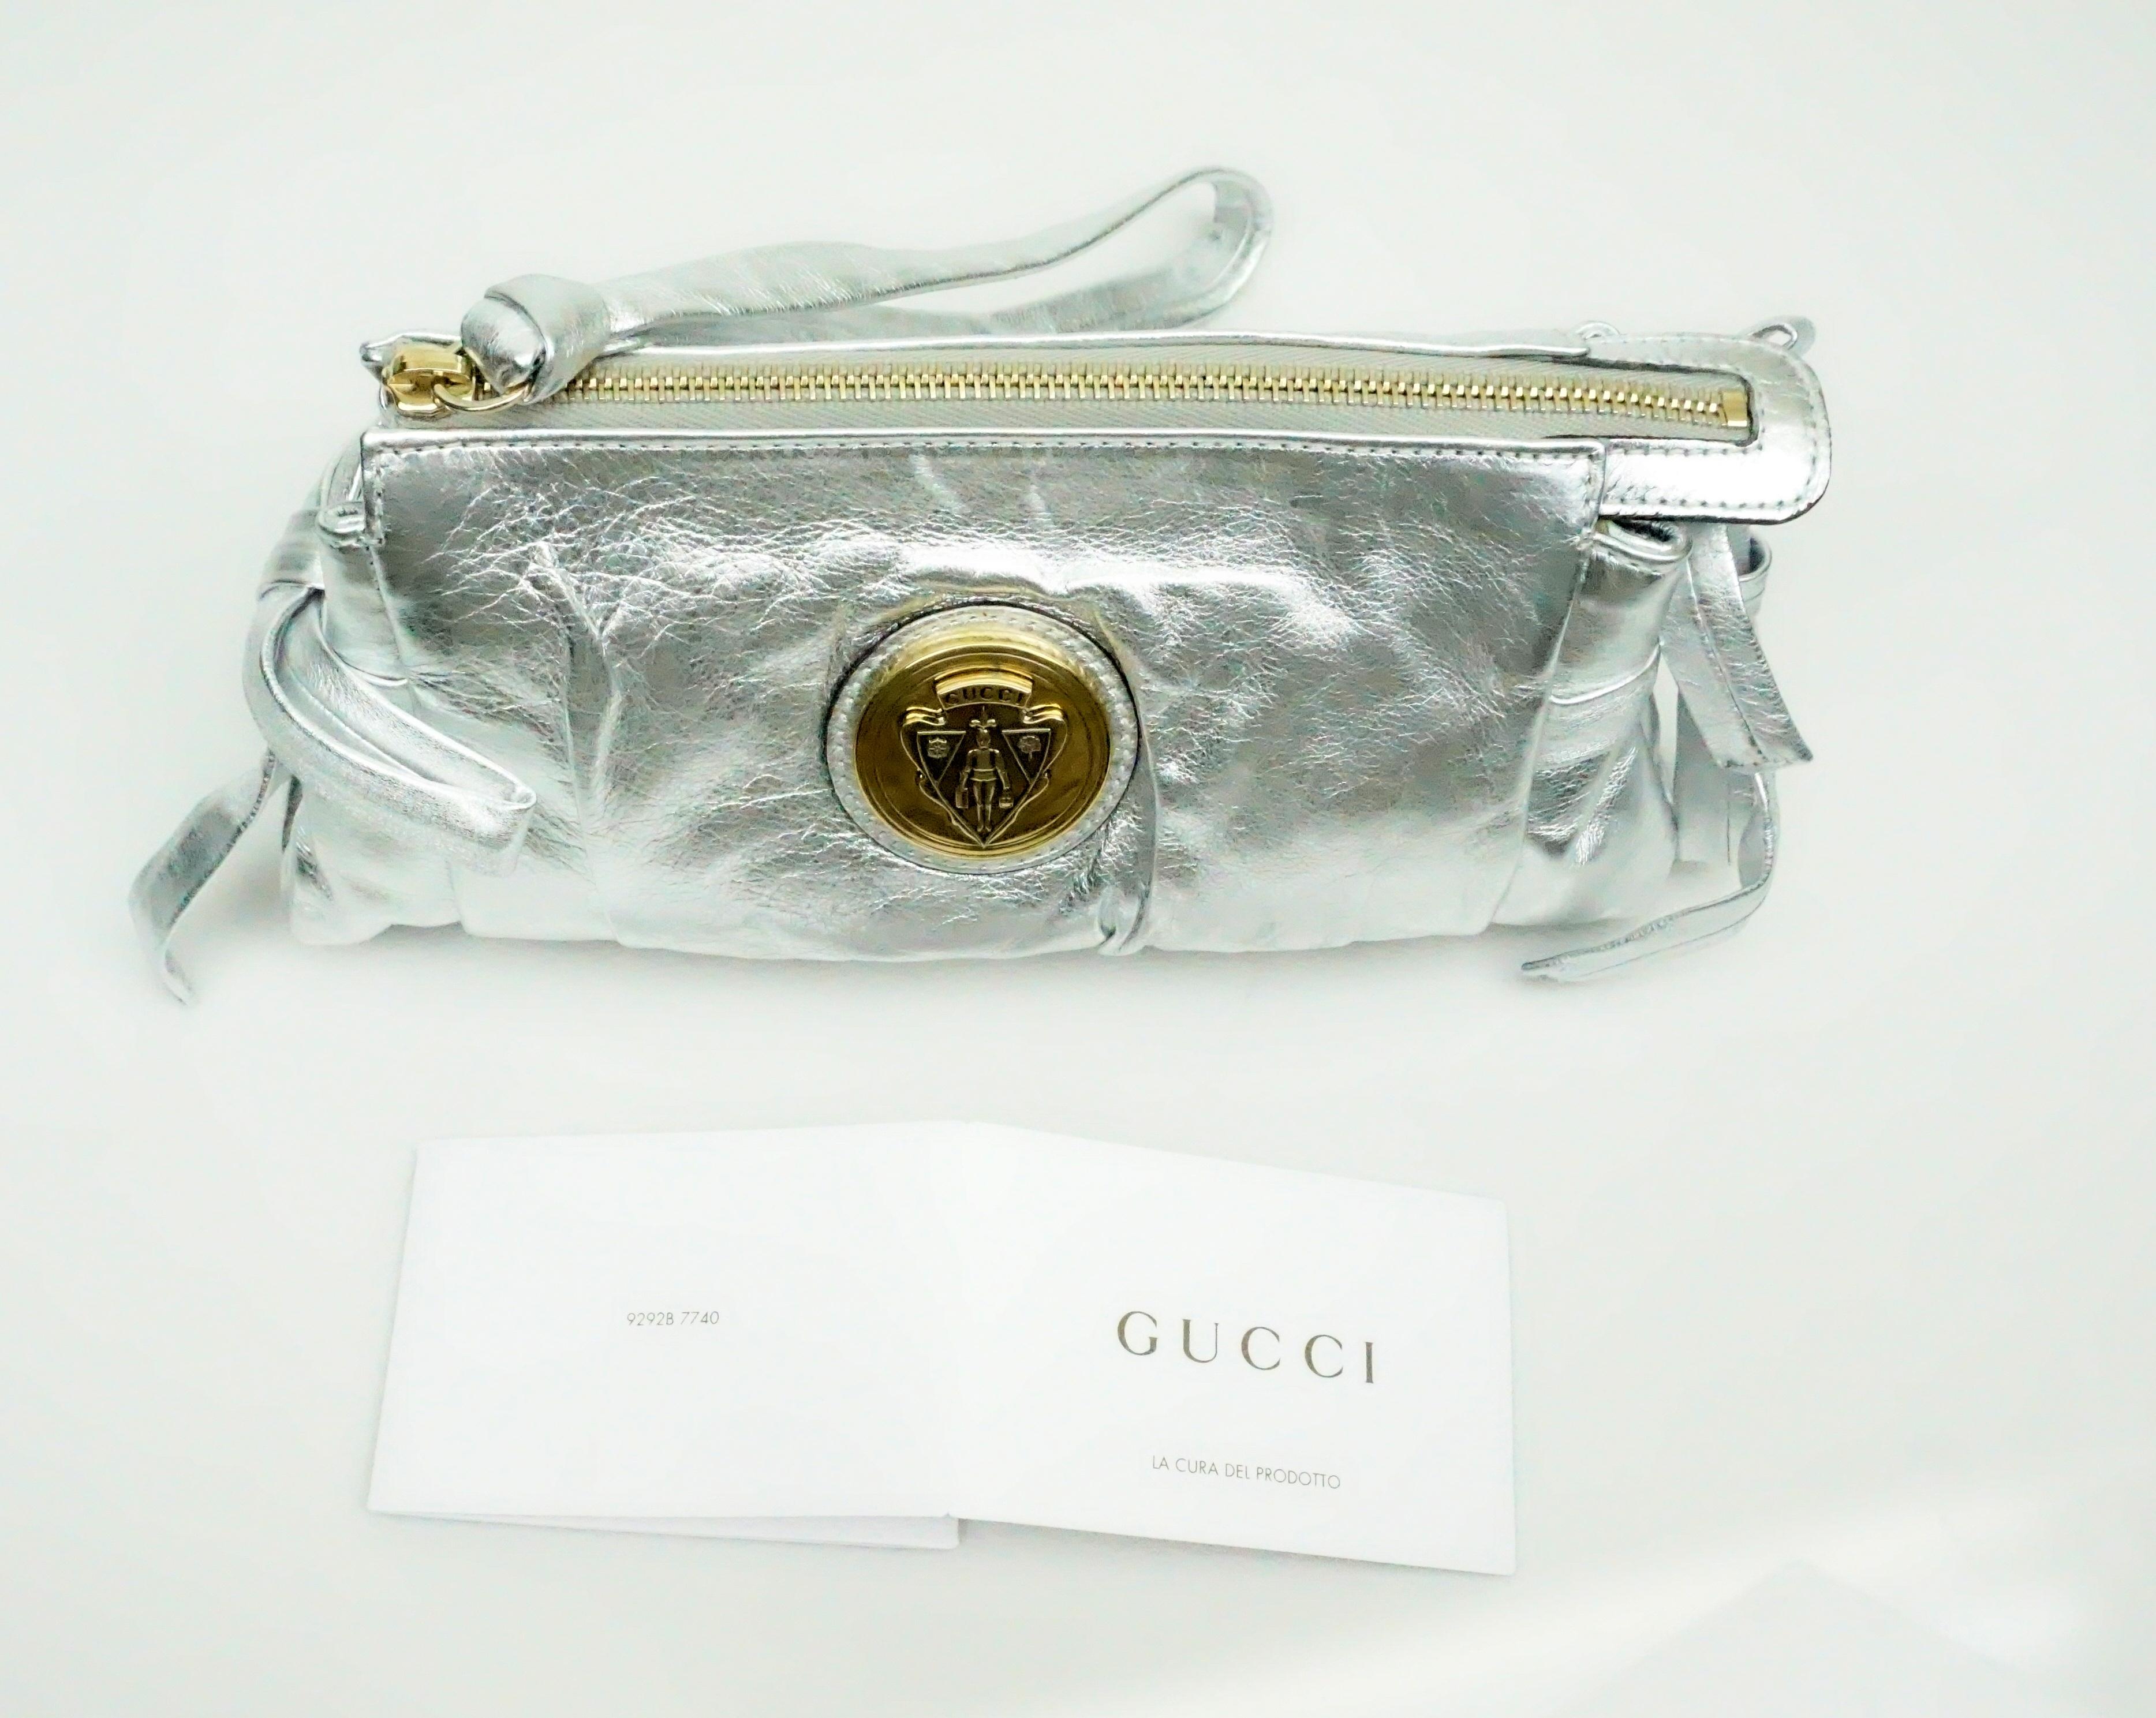 Women's or Men's Gucci Silver Metallic Leather Clutch with Gold Emblem